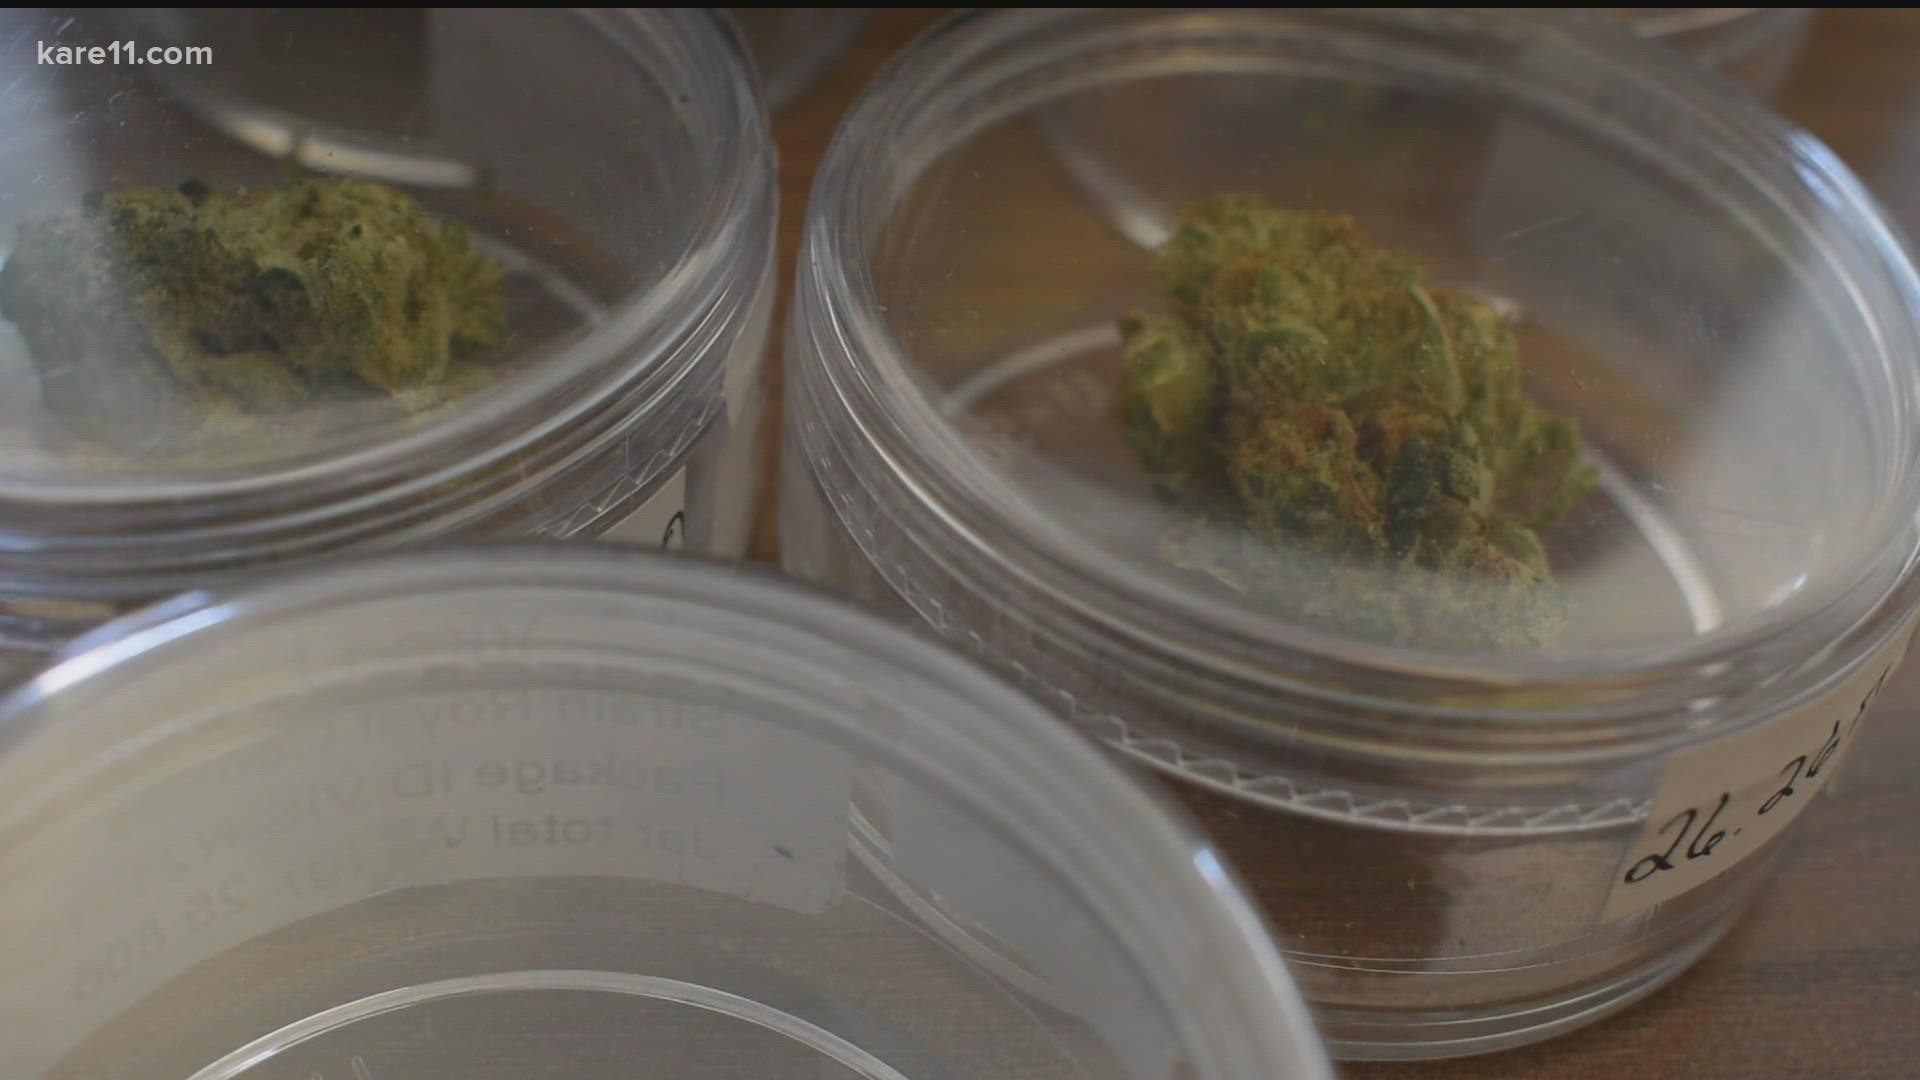 Beginning today the smokable form of cannabis is legal for those enrolled in Minnesota's medical marijuana program.